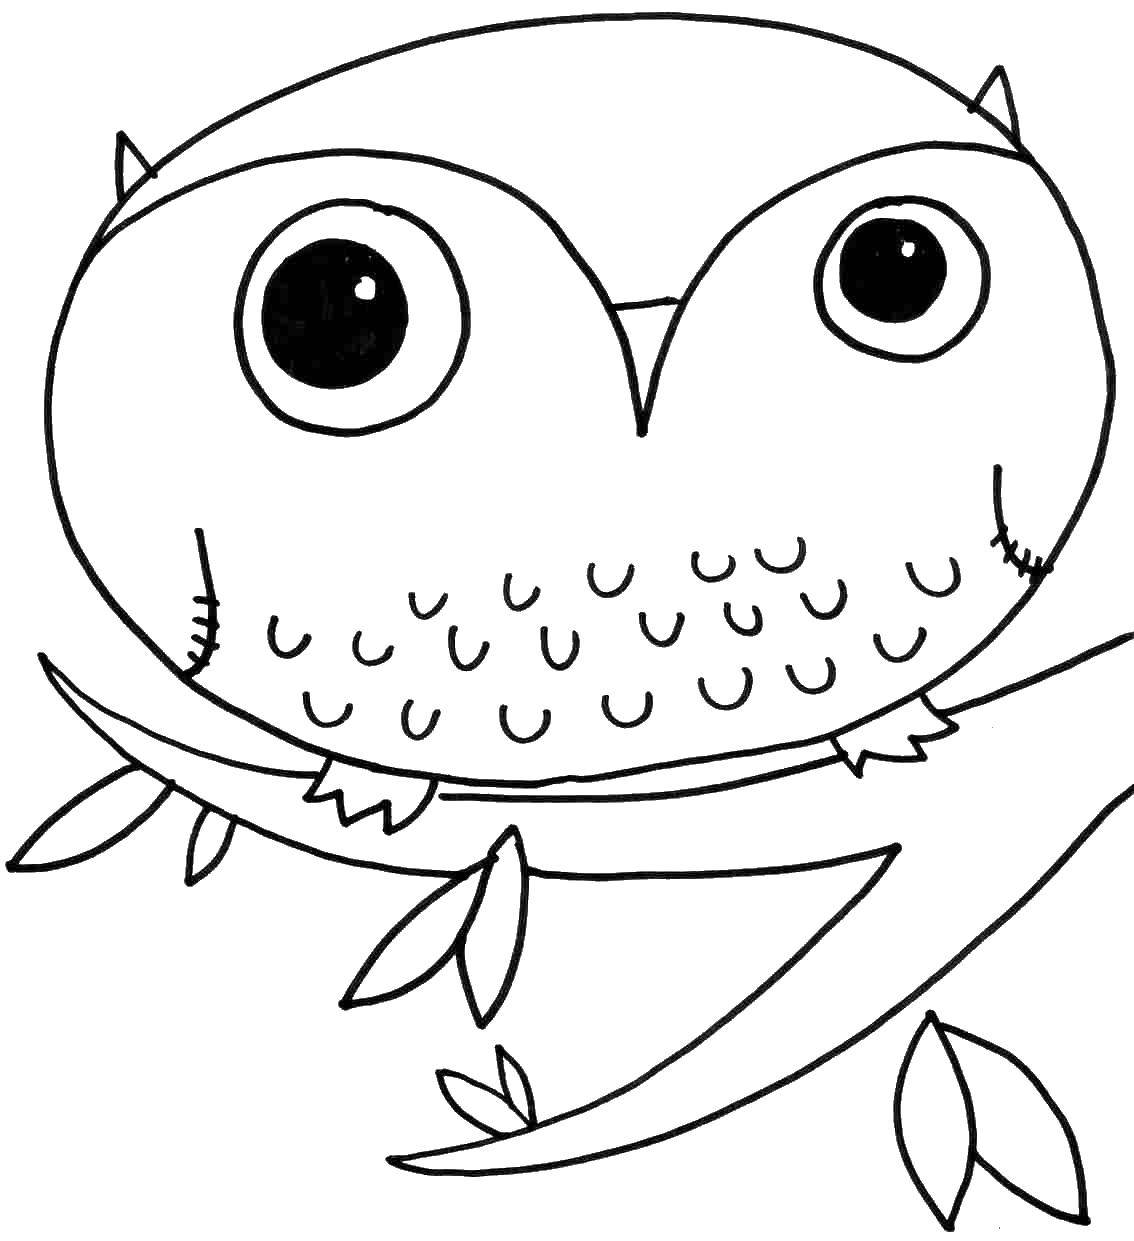 Coloring Owl sitting on the branch of a tree. Category Coloring pages for kids. Tags:  Forest, owl.